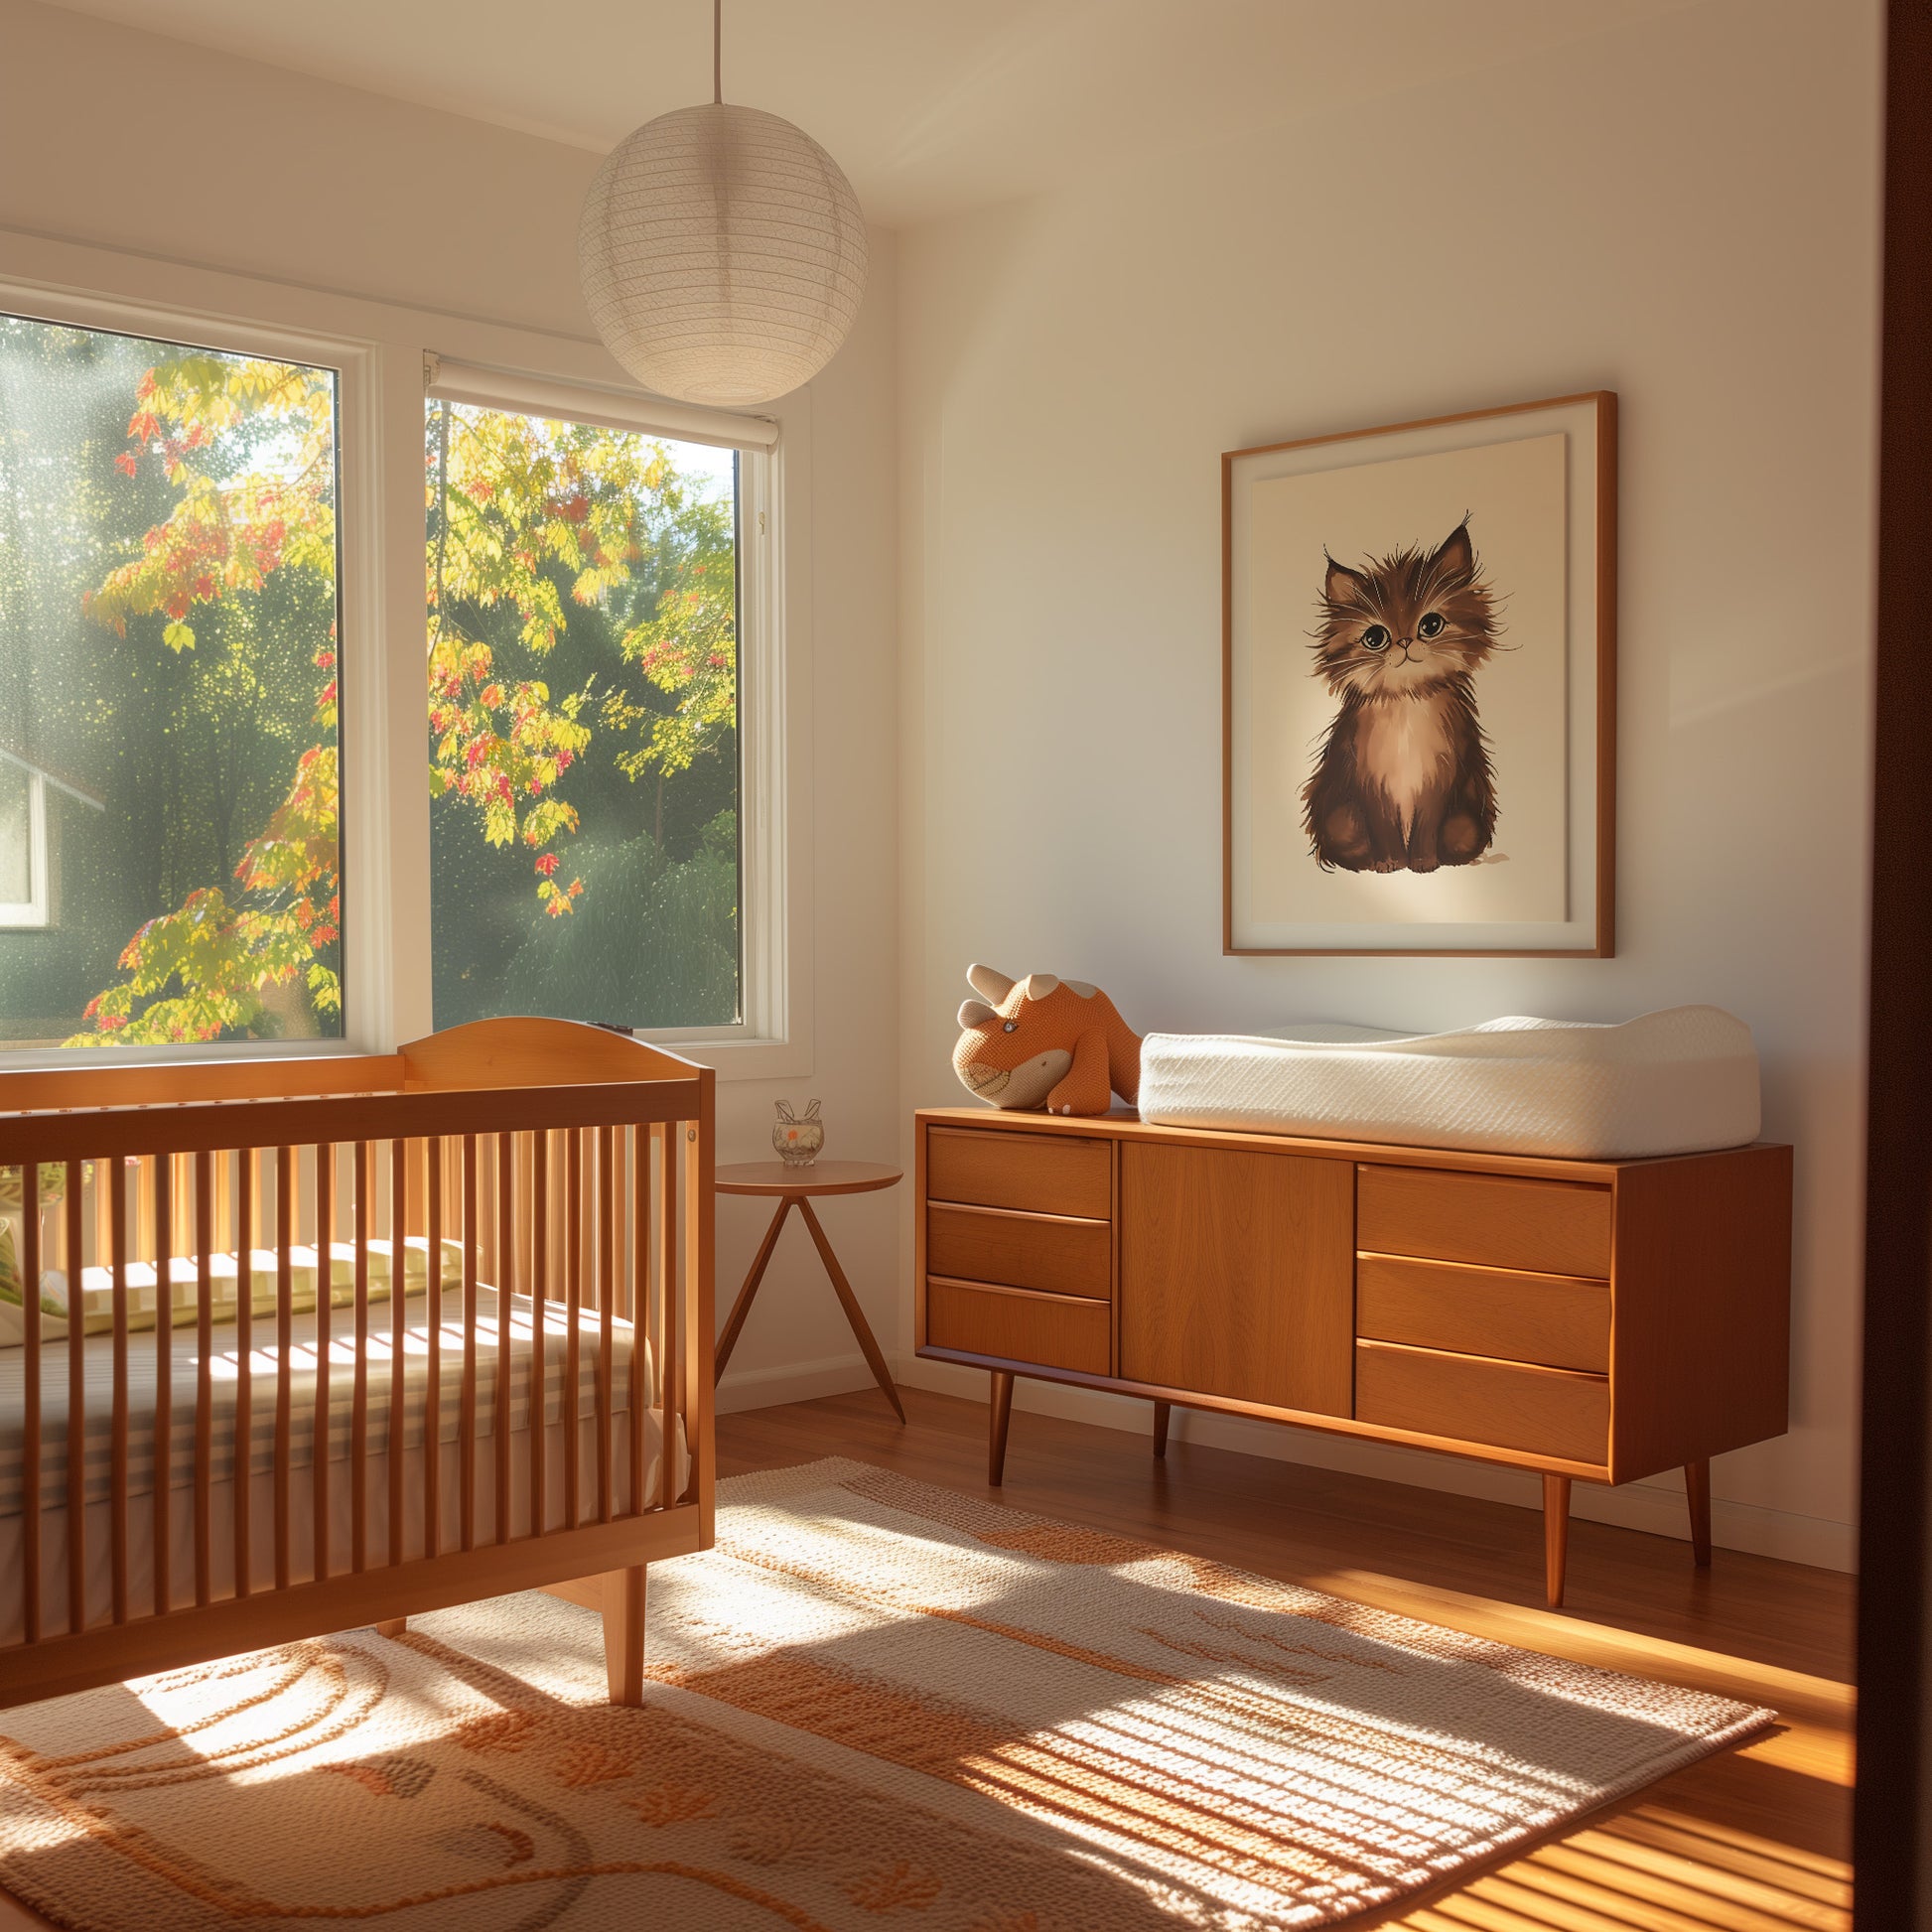 A sunlit nursery with a crib, dresser, and a cat painting on the wall.